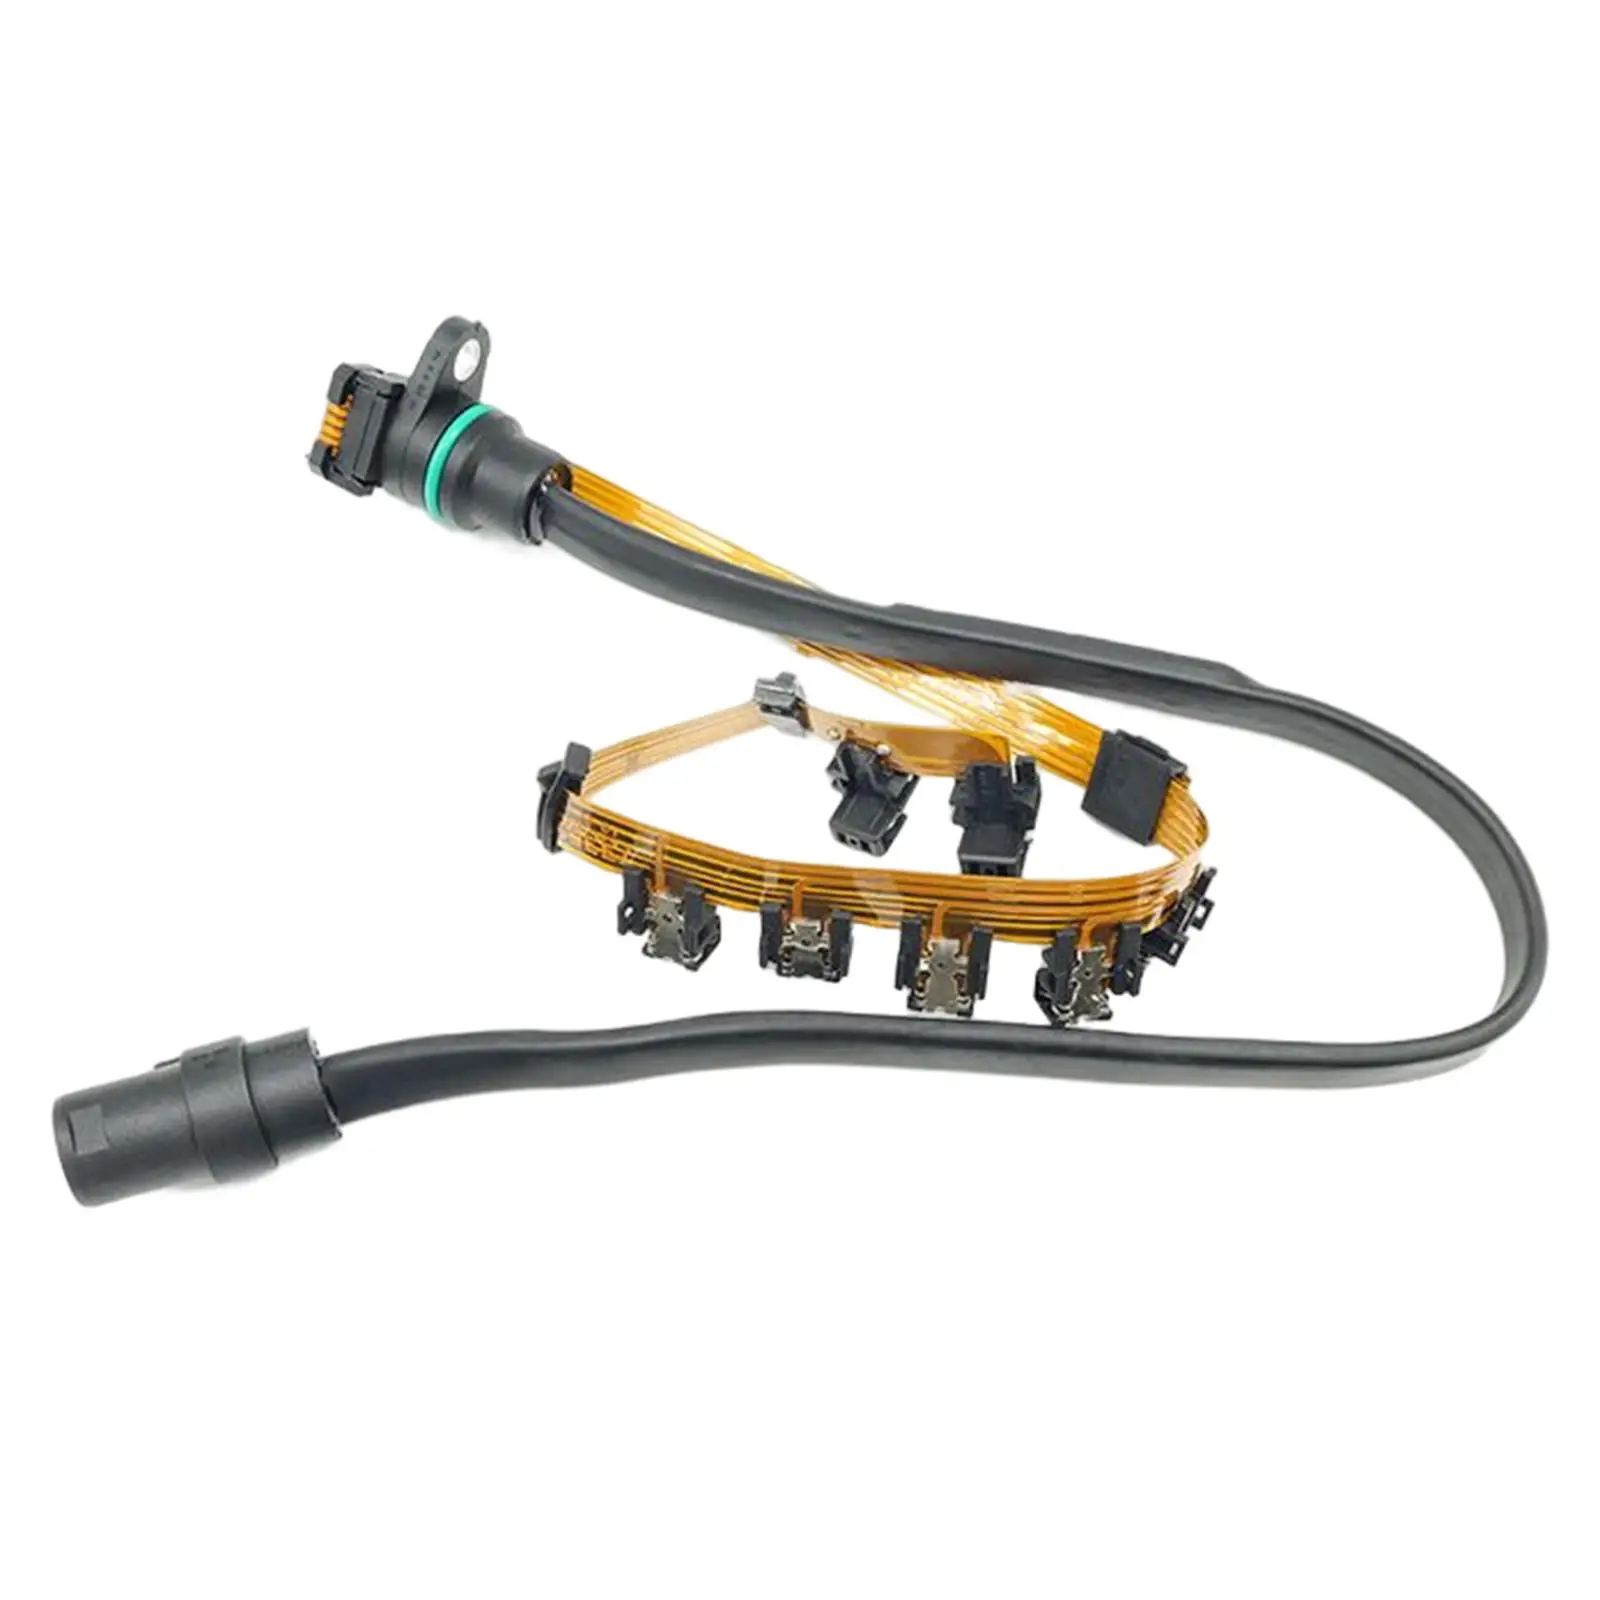 Transmission Internal Wire Harness Repair Part for VW Golf Jetta Beetle